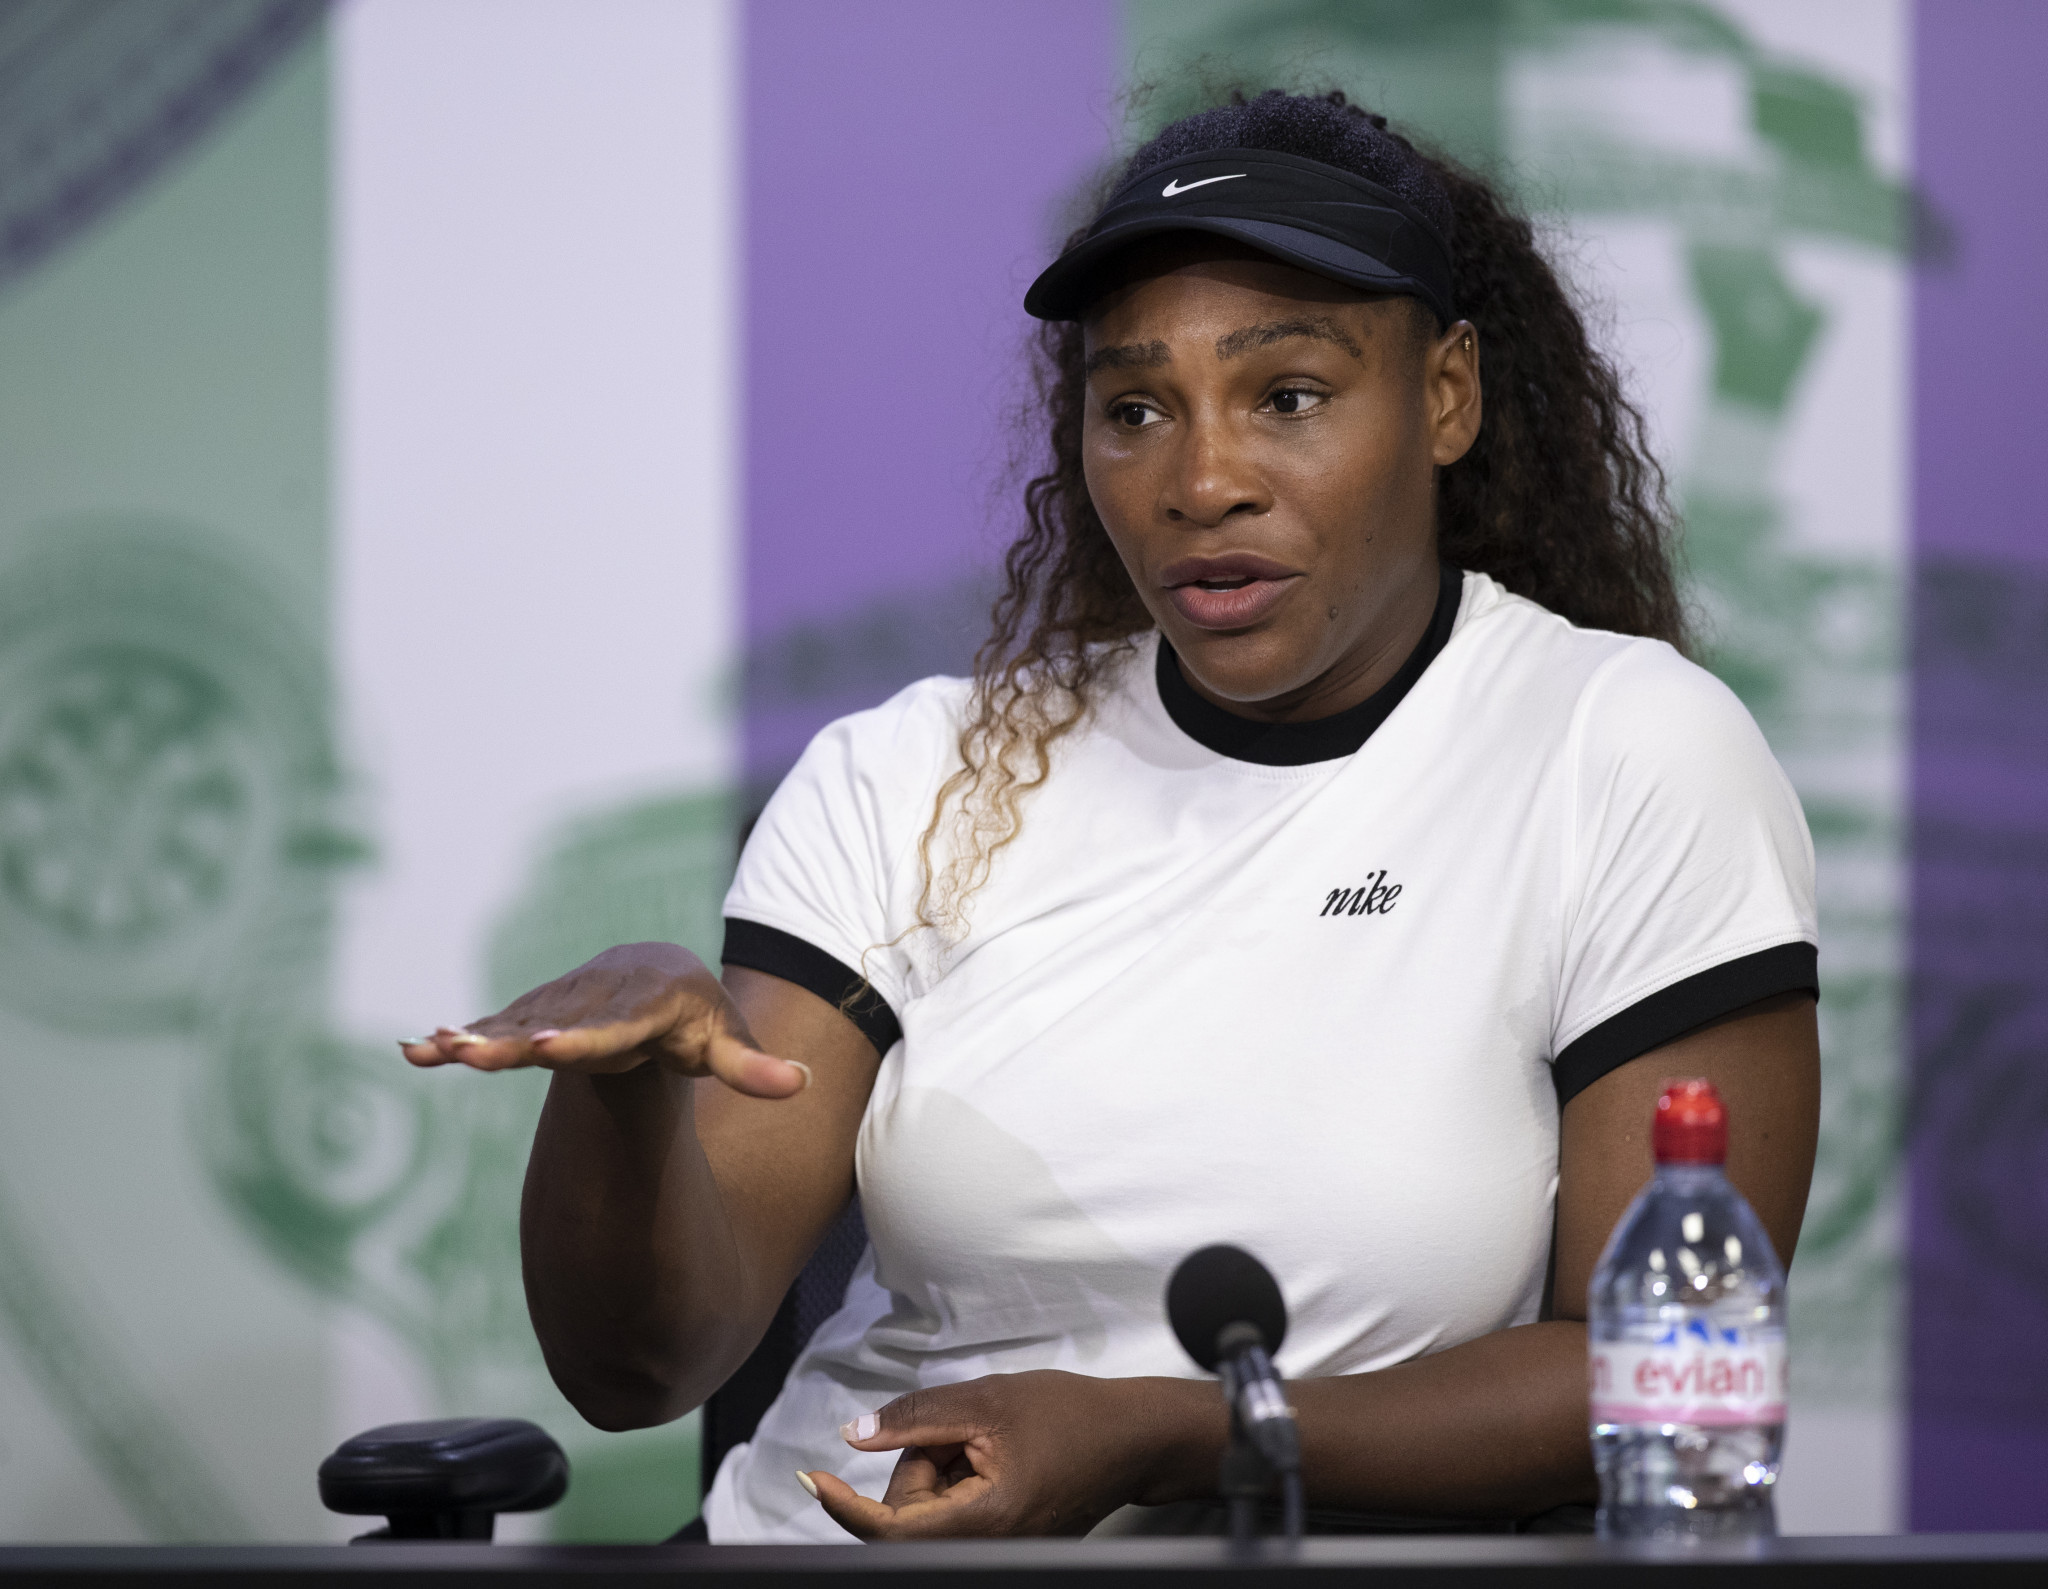 Serena Williams has said the amount she is drug tested is "unfair" ahead of her first round match at Wimbledon ©Getty Images